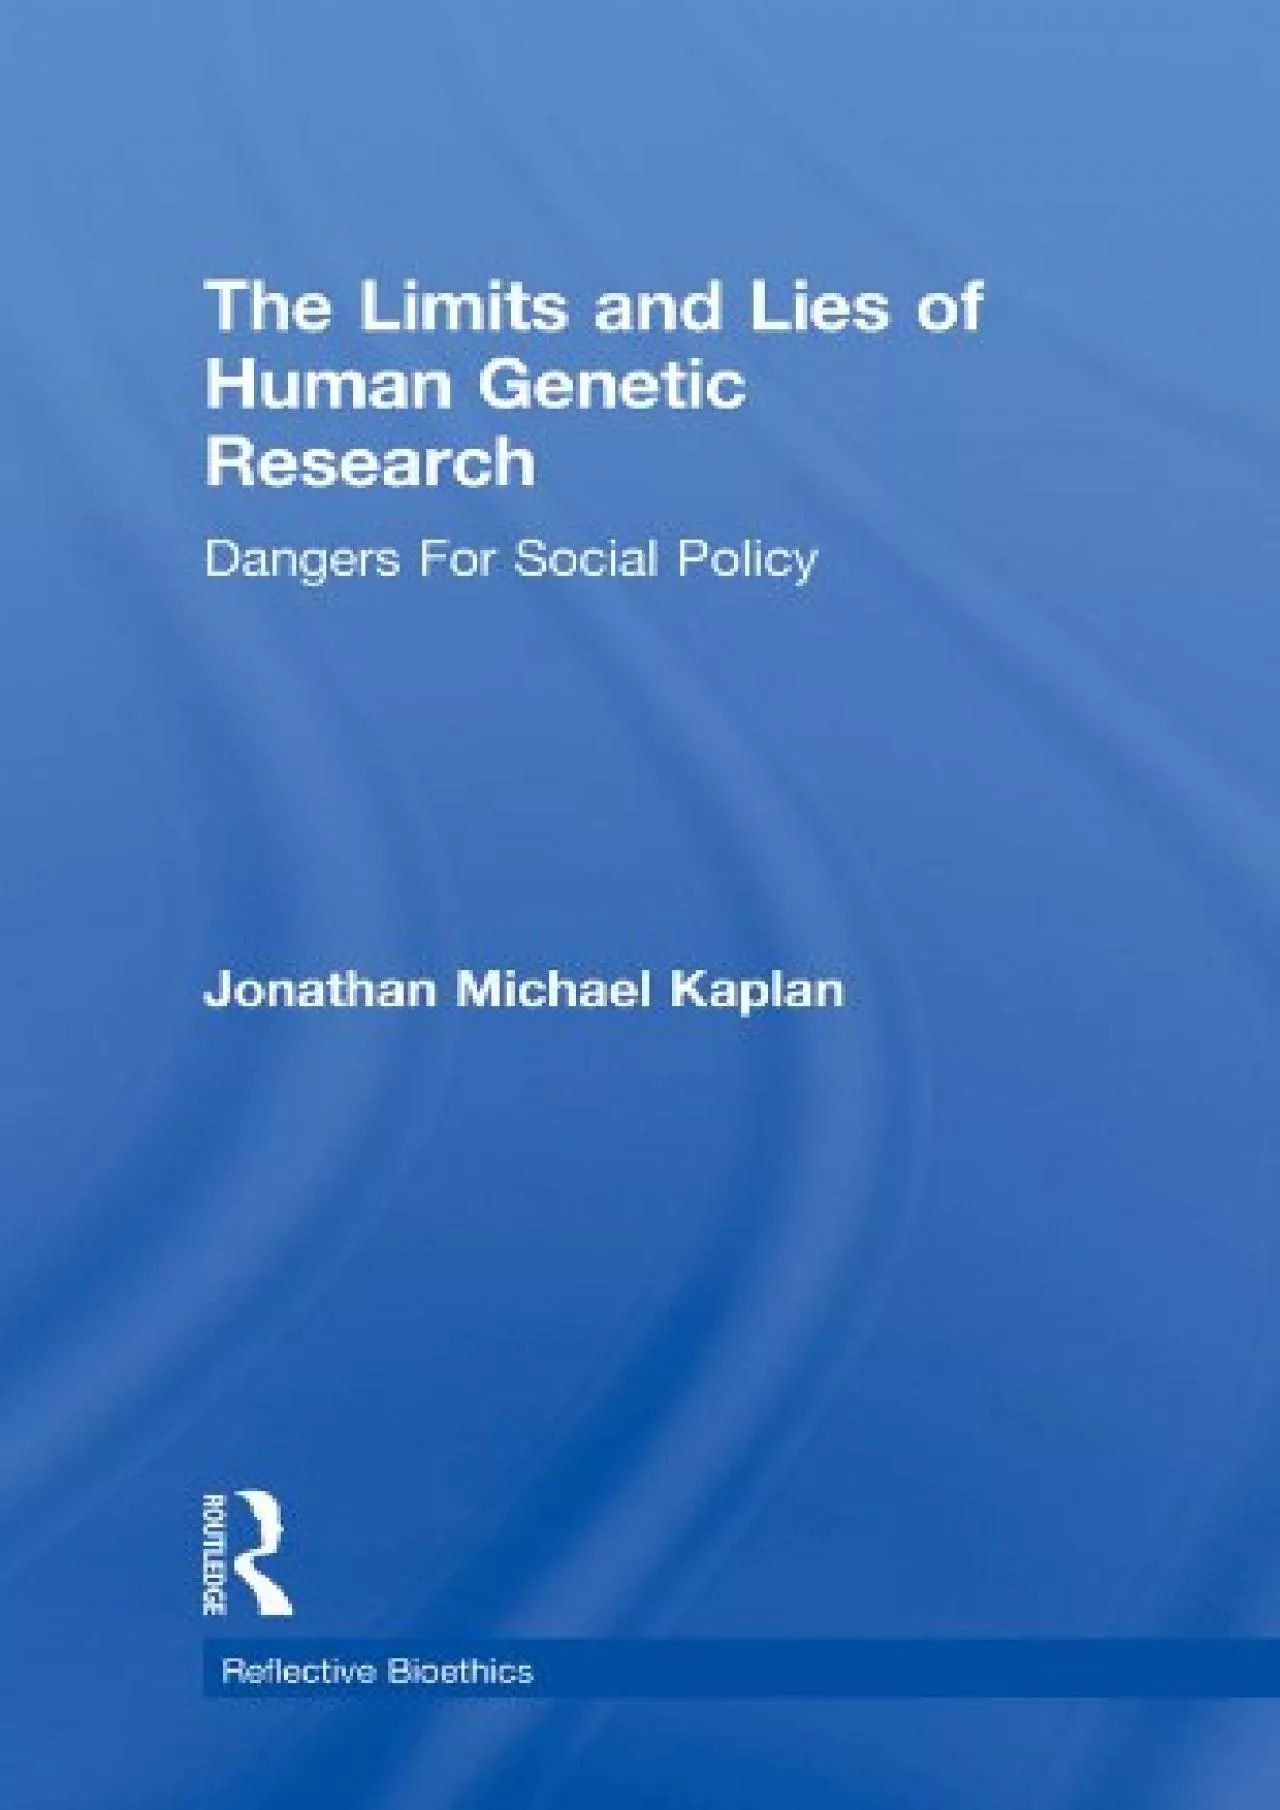 (DOWNLOAD)-The Limits and Lies of Human Genetic Research: Dangers For Social Policy (Reflective